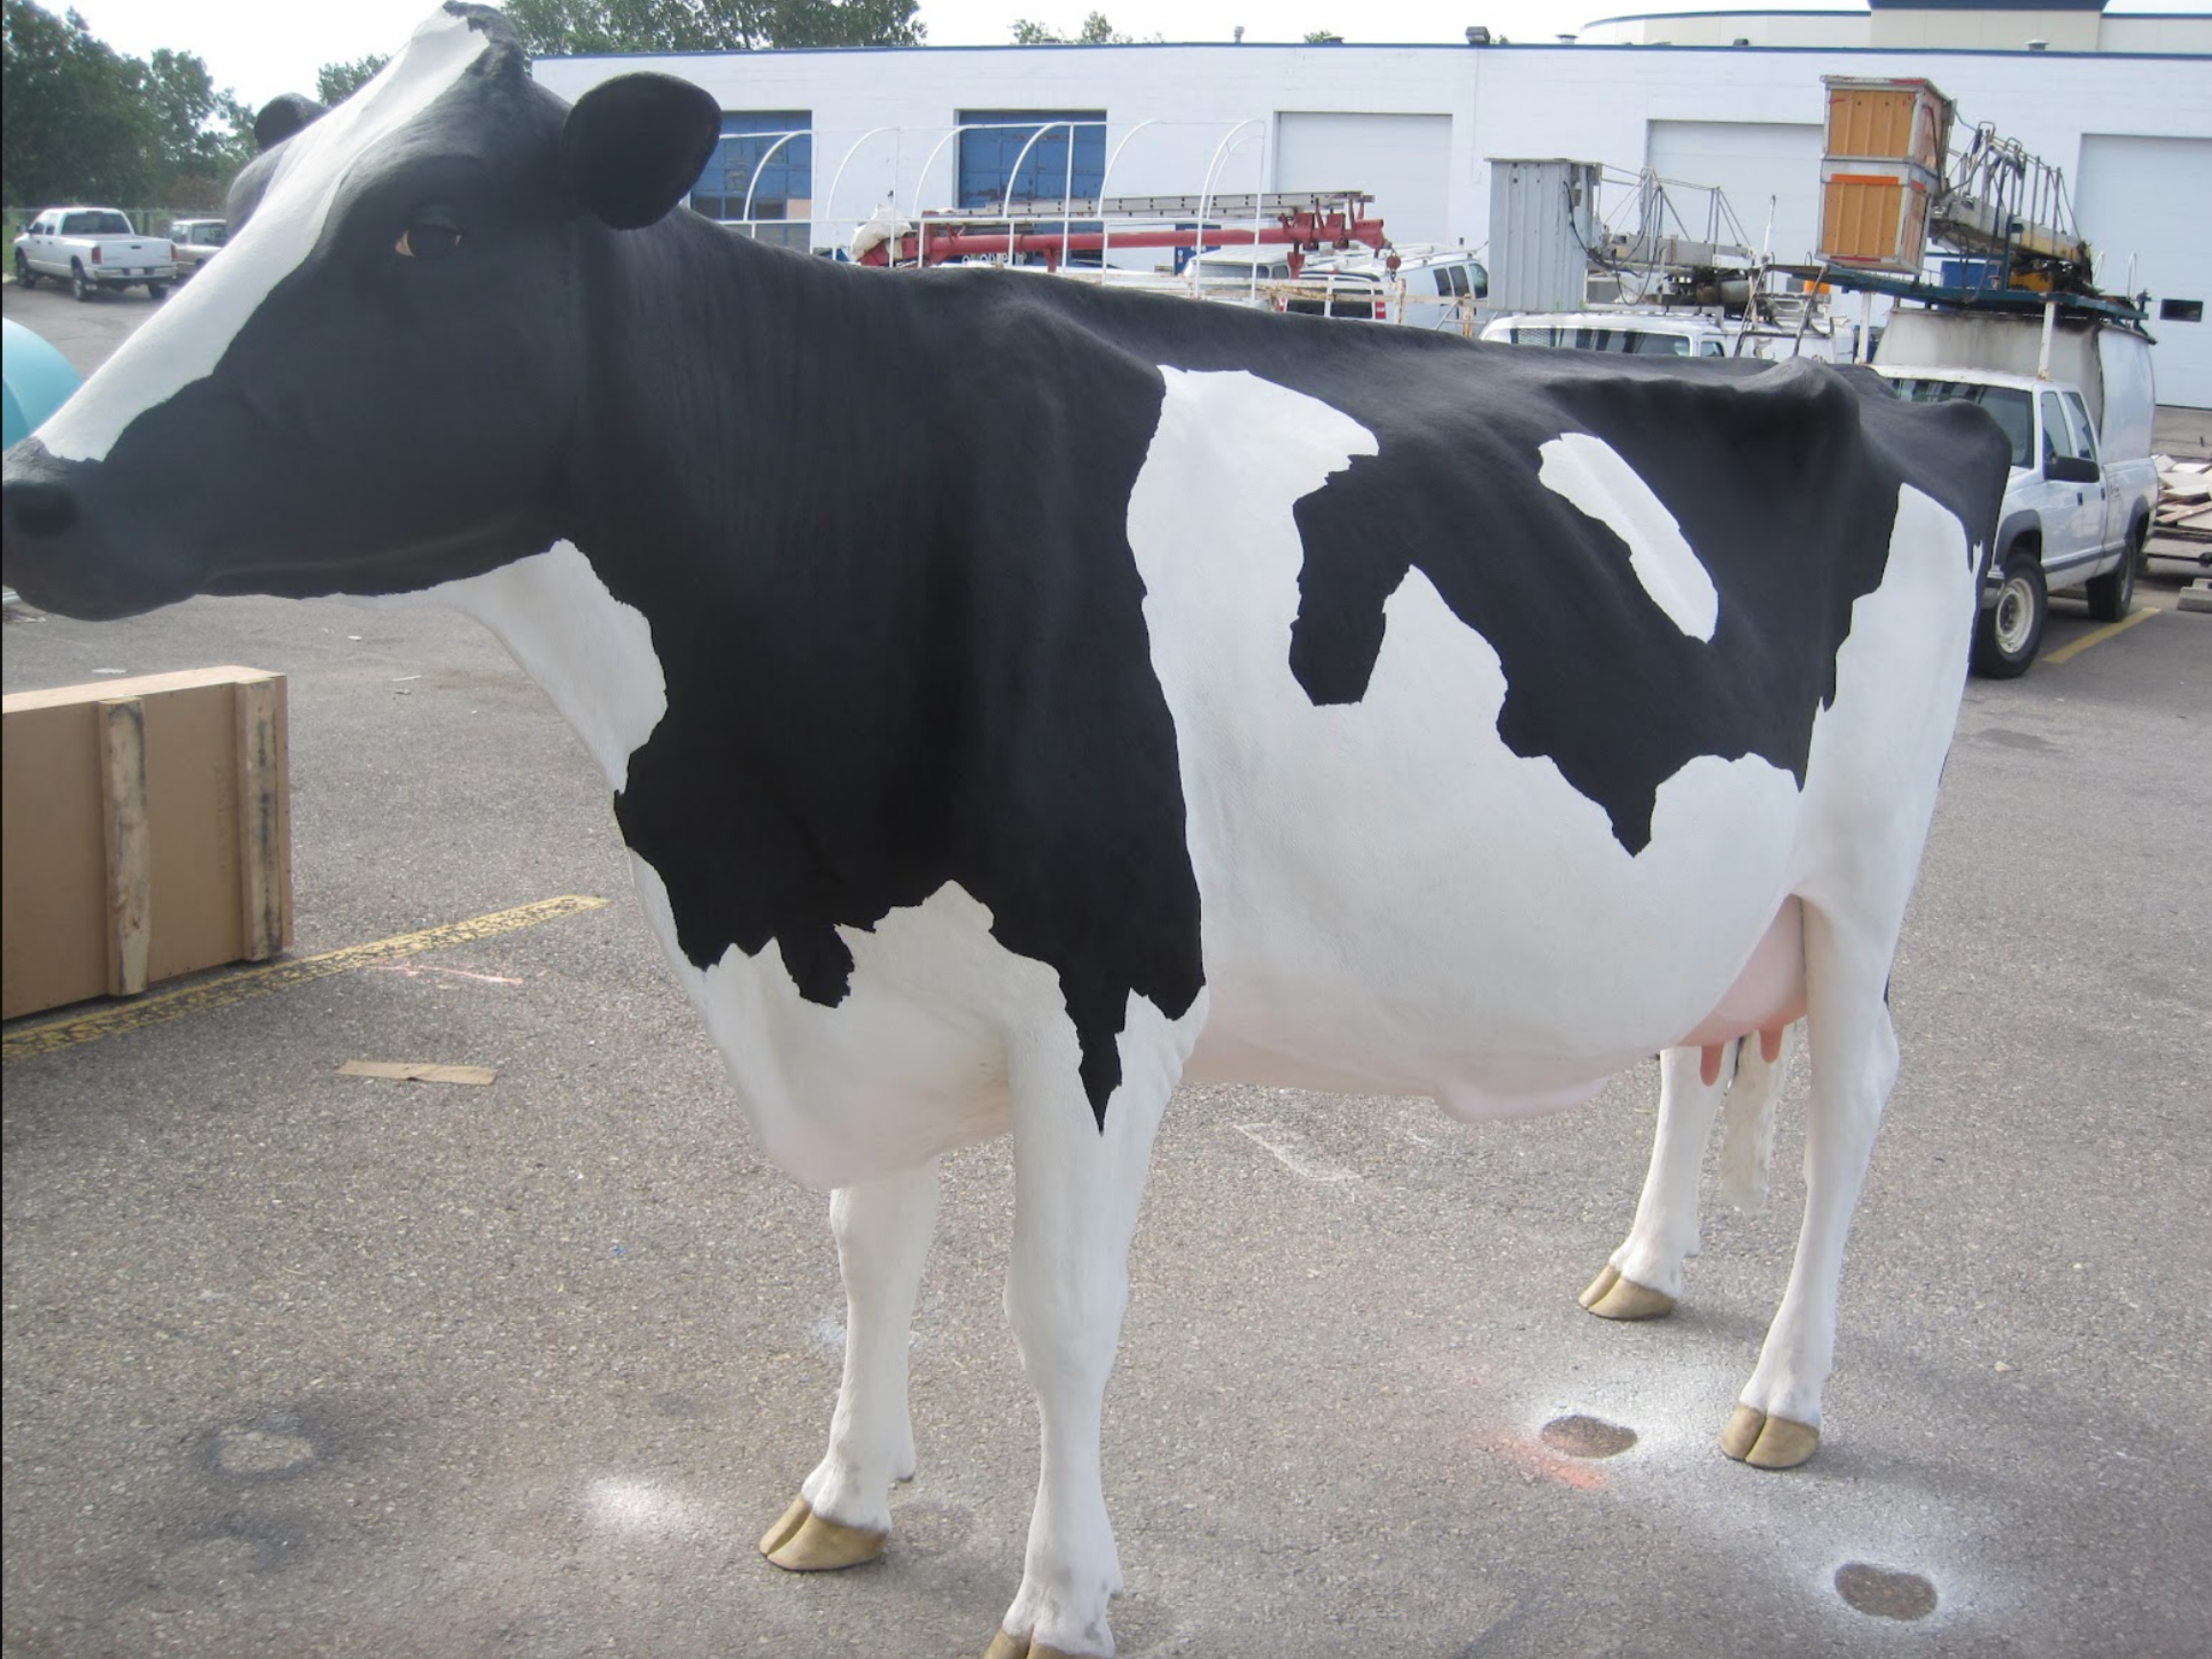  This Holstein model is completed and awaiting pick-up. Alberta Milk will be using it at their display at the Calgary Stampede to demonstrate production milking equipment. To facilitate this the model has soft realistic teats, that are easily replace